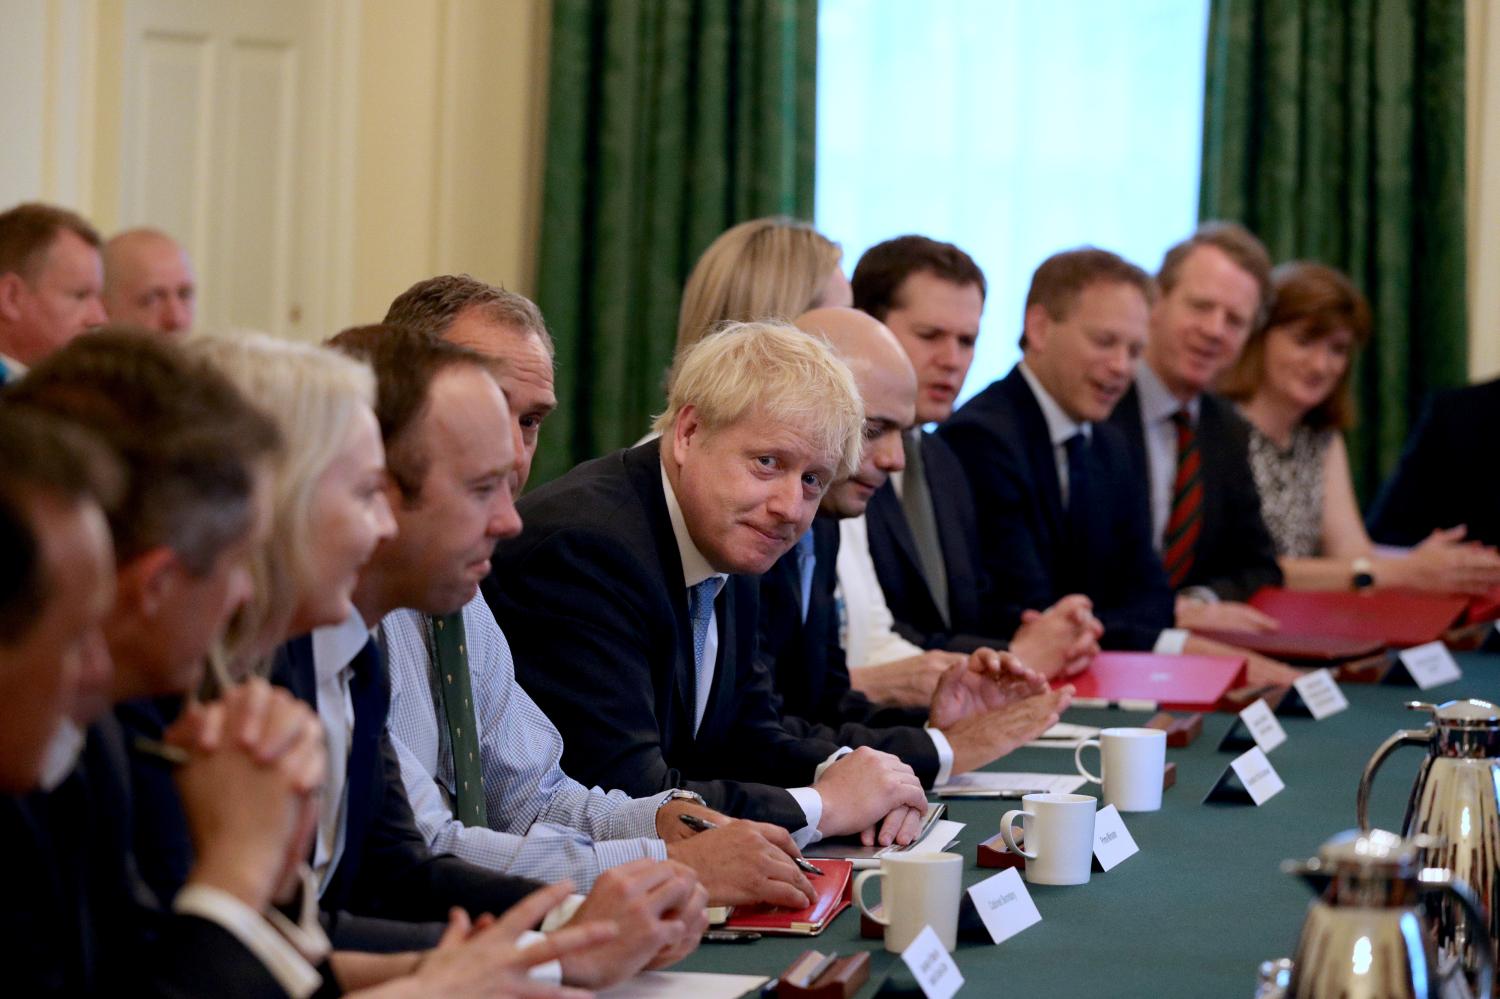 REFILE - ADDING INFORMATION Britain's Prime Minister Boris Johnson holds his first Cabinet meeting at Downing Street in London, Britain, July 25, 2019  Aaron Chown/Pool via REUTERS - RC1E33F5C480